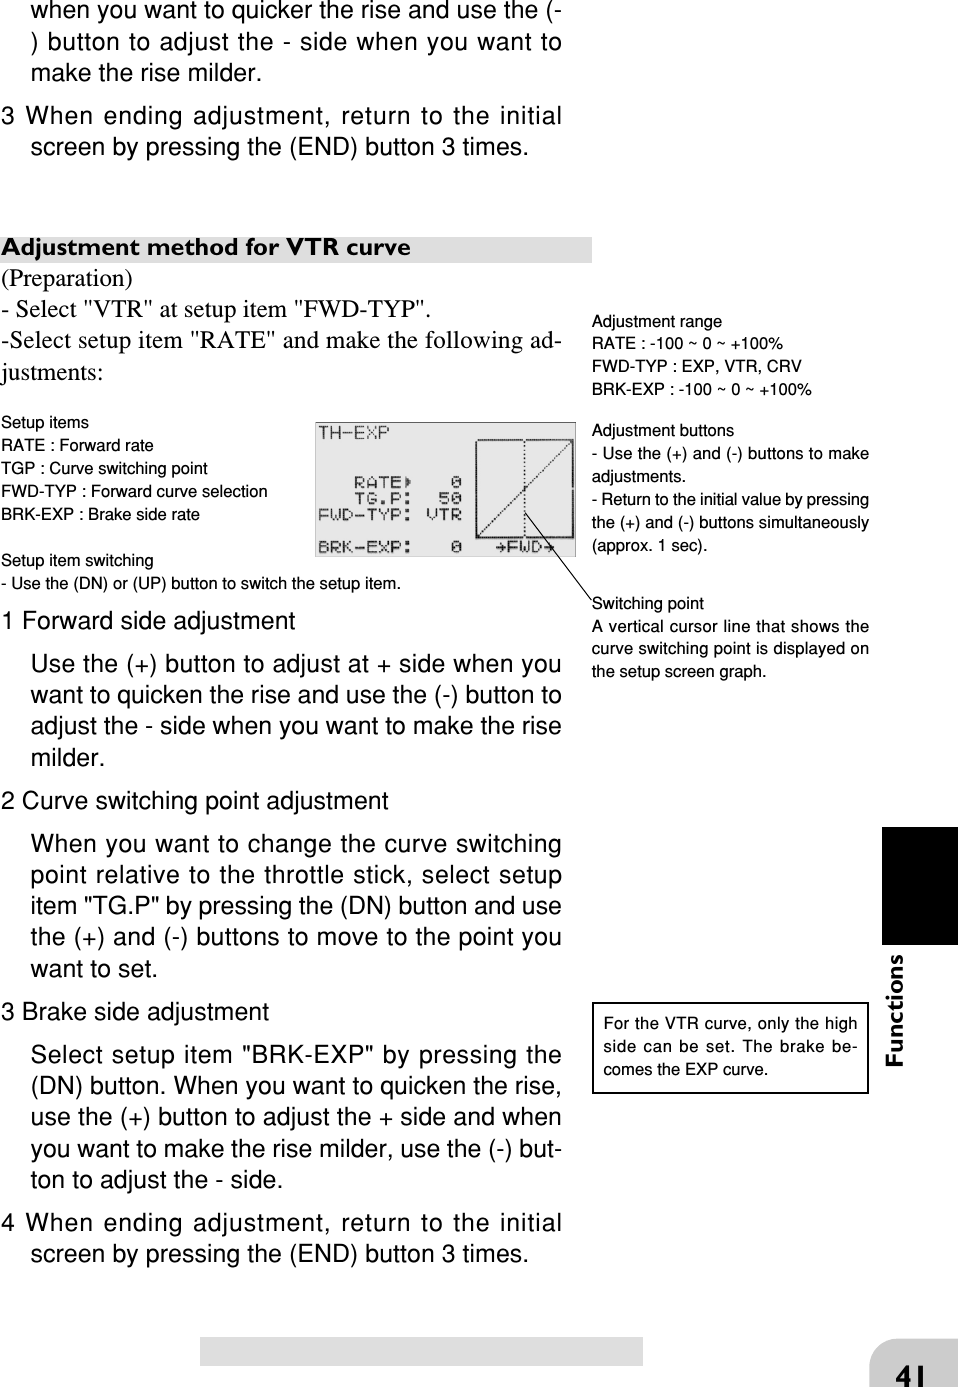 41Functionswhen you want to quicker the rise and use the (-) button to adjust the - side when you want tomake the rise milder.3 When ending adjustment, return to the initialscreen by pressing the (END) button 3 times.Adjustment method for VTR curve(Preparation)- Select &quot;VTR&quot; at setup item &quot;FWD-TYP&quot;.-Select setup item &quot;RATE&quot; and make the following ad-justments:Setup itemsRATE : Forward rateTGP : Curve switching pointFWD-TYP : Forward curve selectionBRK-EXP : Brake side rateSetup item switching- Use the (DN) or (UP) button to switch the setup item.1 Forward side adjustmentUse the (+) button to adjust at + side when youwant to quicken the rise and use the (-) button toadjust the - side when you want to make the risemilder.2 Curve switching point adjustmentWhen you want to change the curve switchingpoint relative to the throttle stick, select setupitem &quot;TG.P&quot; by pressing the (DN) button and usethe (+) and (-) buttons to move to the point youwant to set.3 Brake side adjustmentSelect setup item &quot;BRK-EXP&quot; by pressing the(DN) button. When you want to quicken the rise,use the (+) button to adjust the + side and whenyou want to make the rise milder, use the (-) but-ton to adjust the - side.4 When ending adjustment, return to the initialscreen by pressing the (END) button 3 times.Switching pointA vertical cursor line that shows thecurve switching point is displayed onthe setup screen graph.For the VTR curve, only the highside can be set. The brake be-comes the EXP curve.Adjustment rangeRATE : -100 ~ 0 ~ +100%FWD-TYP : EXP, VTR, CRVBRK-EXP : -100 ~ 0 ~ +100%Adjustment buttons- Use the (+) and (-) buttons to makeadjustments.- Return to the initial value by pressingthe (+) and (-) buttons simultaneously(approx. 1 sec).